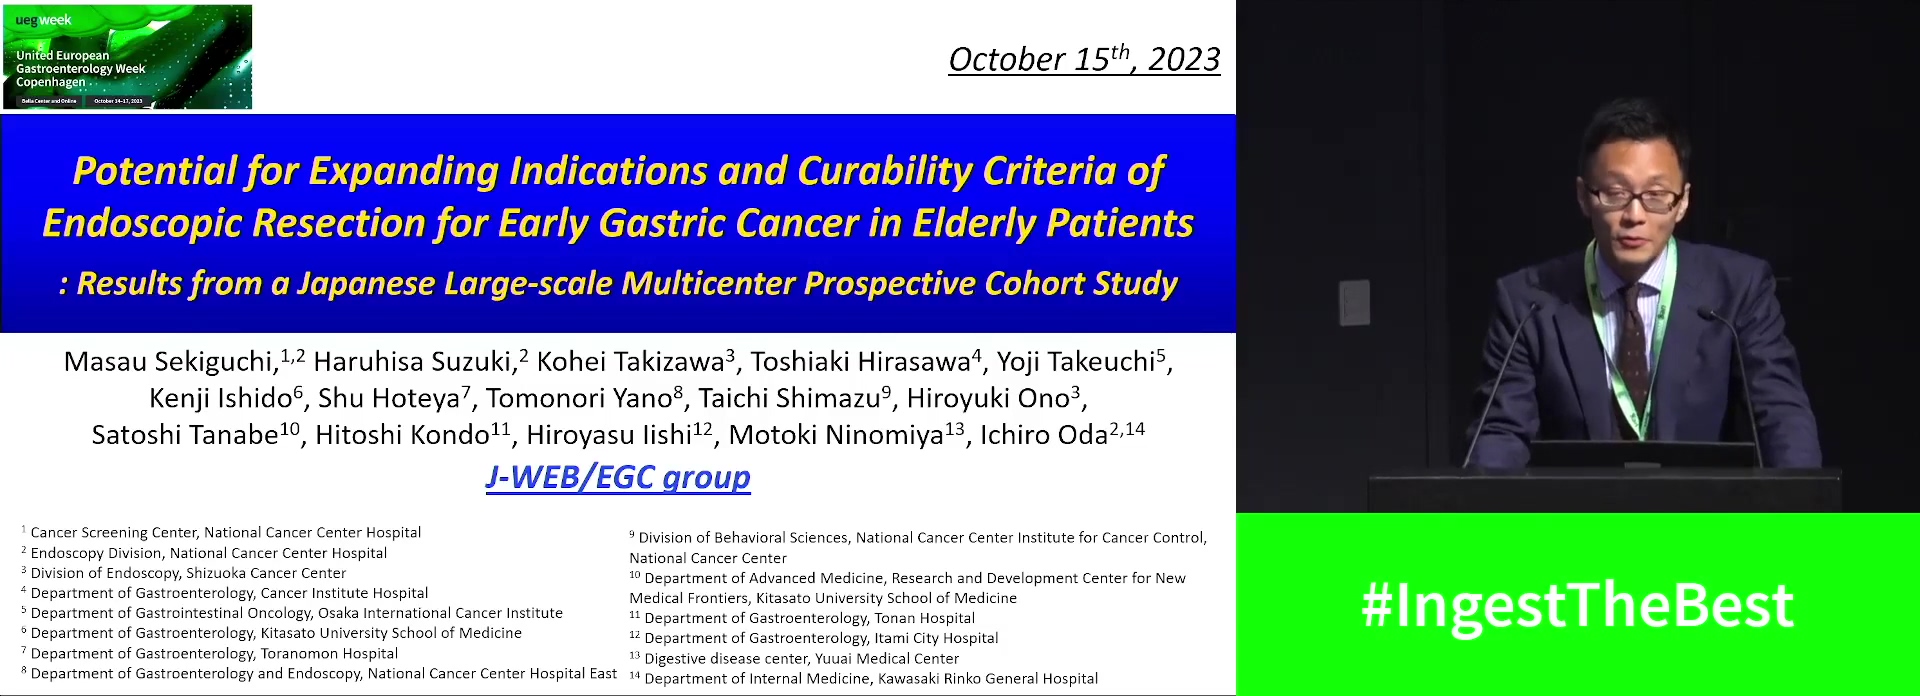 POTENTIAL FOR EXPANDING INDICATIONS AND CURABILITY CRITERIA OF ENDOSCOPIC RESECTION FOR EARLY GASTRIC CANCER IN ELDERLY PATIENTS: RESULTS FROM A JAPANESE LARGE-SCALE MULTICENTER PROSPECTIVE COHORT STUDY